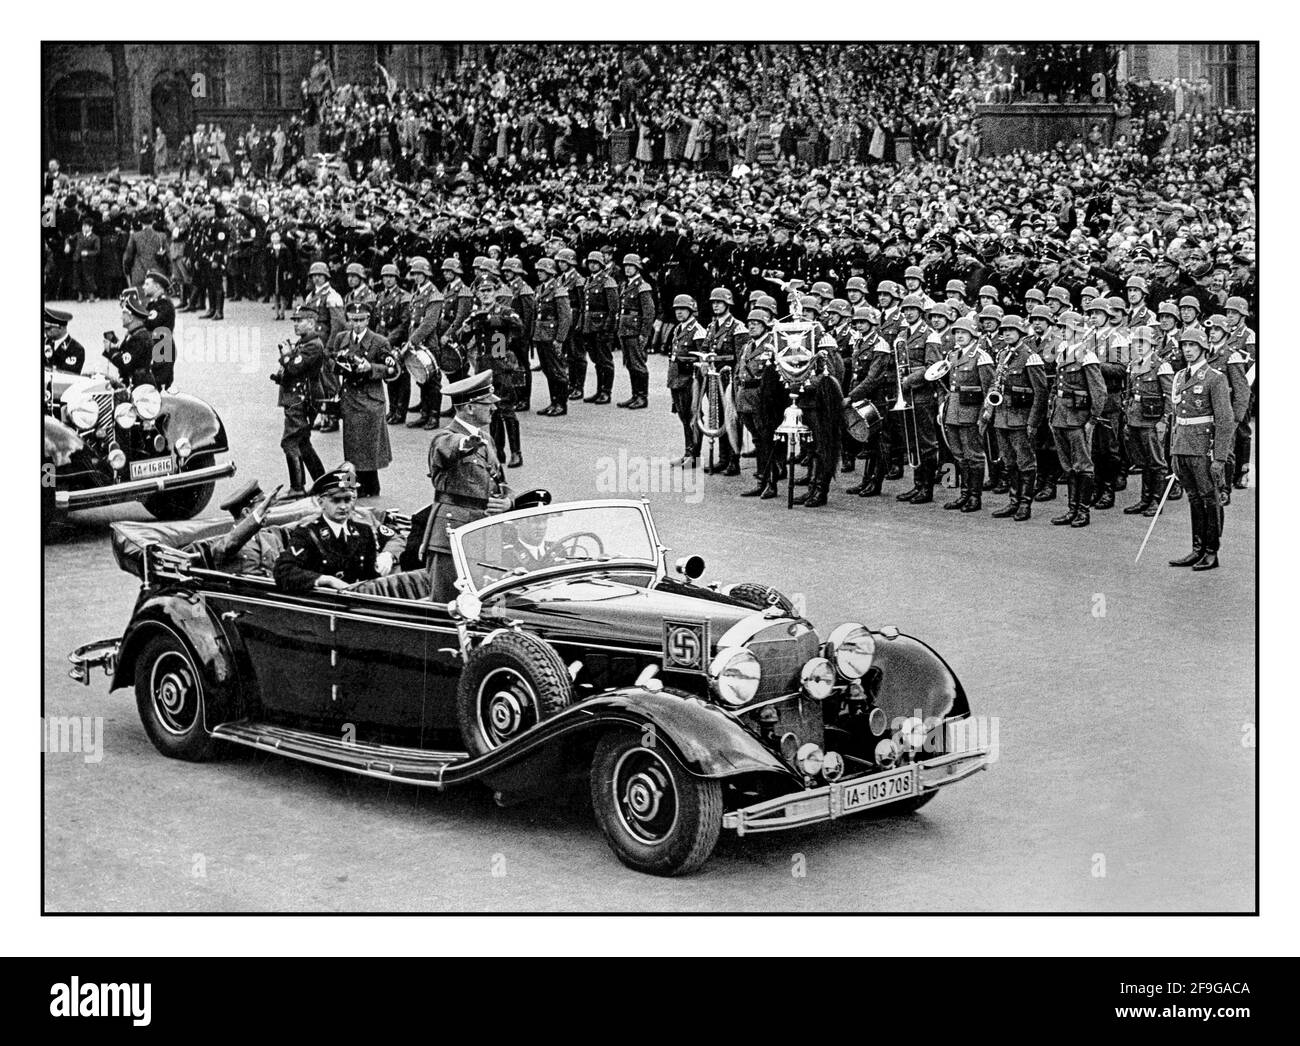 Adolf Hitler in uniform, standing in his official open top Mercedes motorcar wearing swastika armband gives Heil Hitler salute to the military and crowds at a huge Nazi rally in 1938 Germany. Hitler salutes attendees at a Reichsparteitag (Reich Party Day) in Nuremberg, Germany. A uniformed Martin Bormann and Dr Goebbels also in attendance sitting in rear of open top Mercedes Car Stock Photo